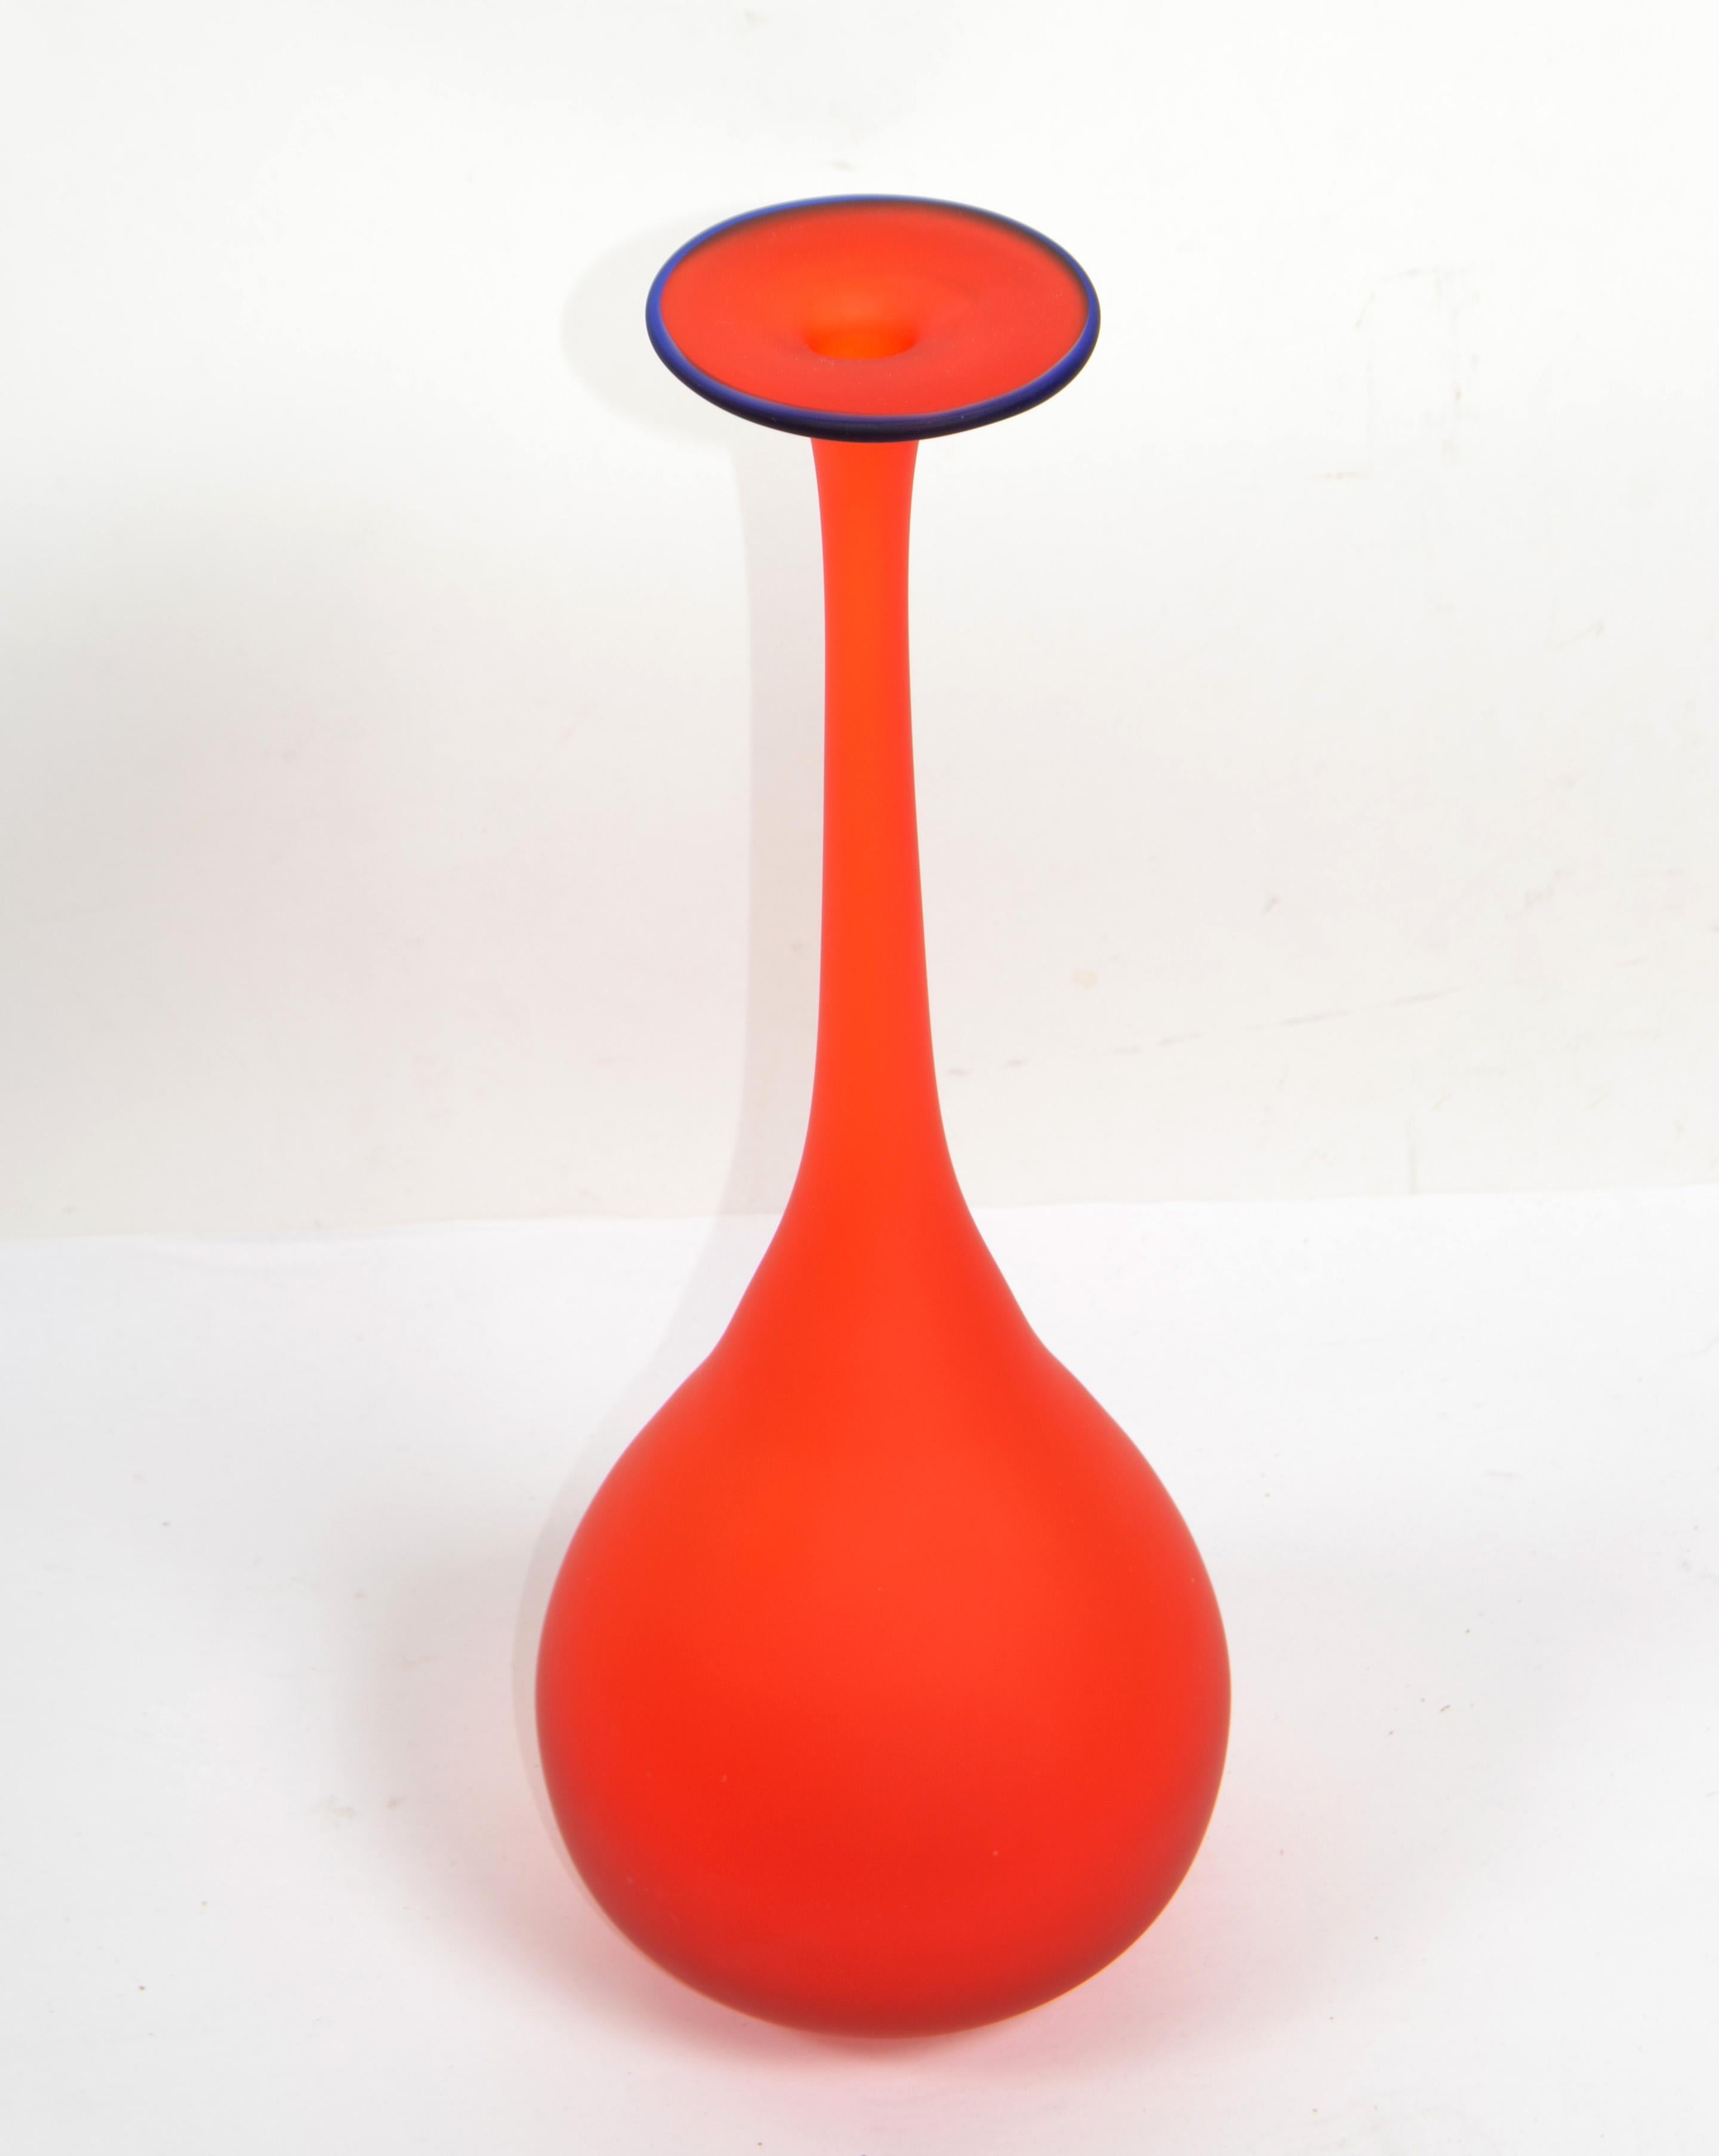 Hand-Crafted Carlo Moretti Style Italian Translucent Red & Blue Satin Glass Bud Vase Vessel For Sale